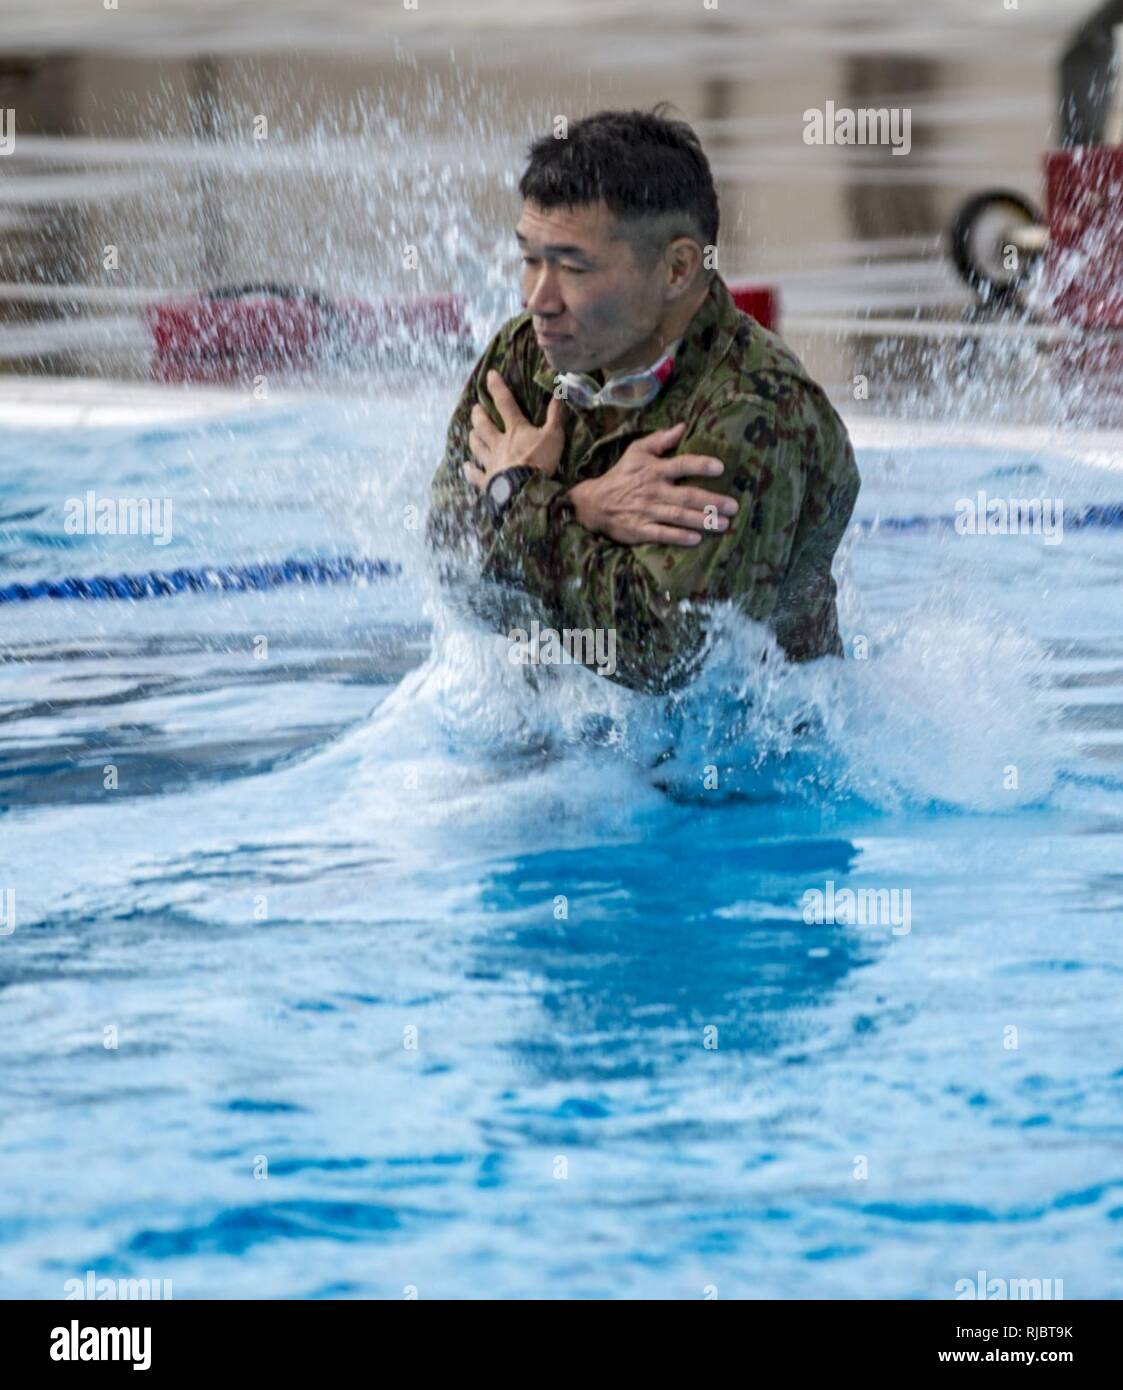 MARINE CORPS BASE CAMP PENDLETON, California – A Japan Ground Self Defense Force soldier jump from a 15 foot diving board into a pool to conduct a Marine Corps intermediate swim qualification as part of exercise Iron Fist Jan. 16, 2018. Iron Fist brings together U.S. Marines from the 11th Marine Expeditionary Unit and Soldiers from the Japan Ground Self Defense Force, Western Army Infantry Regiment, to improve bilateral planning, communicating, and conduct combined amphibious operations. Stock Photo